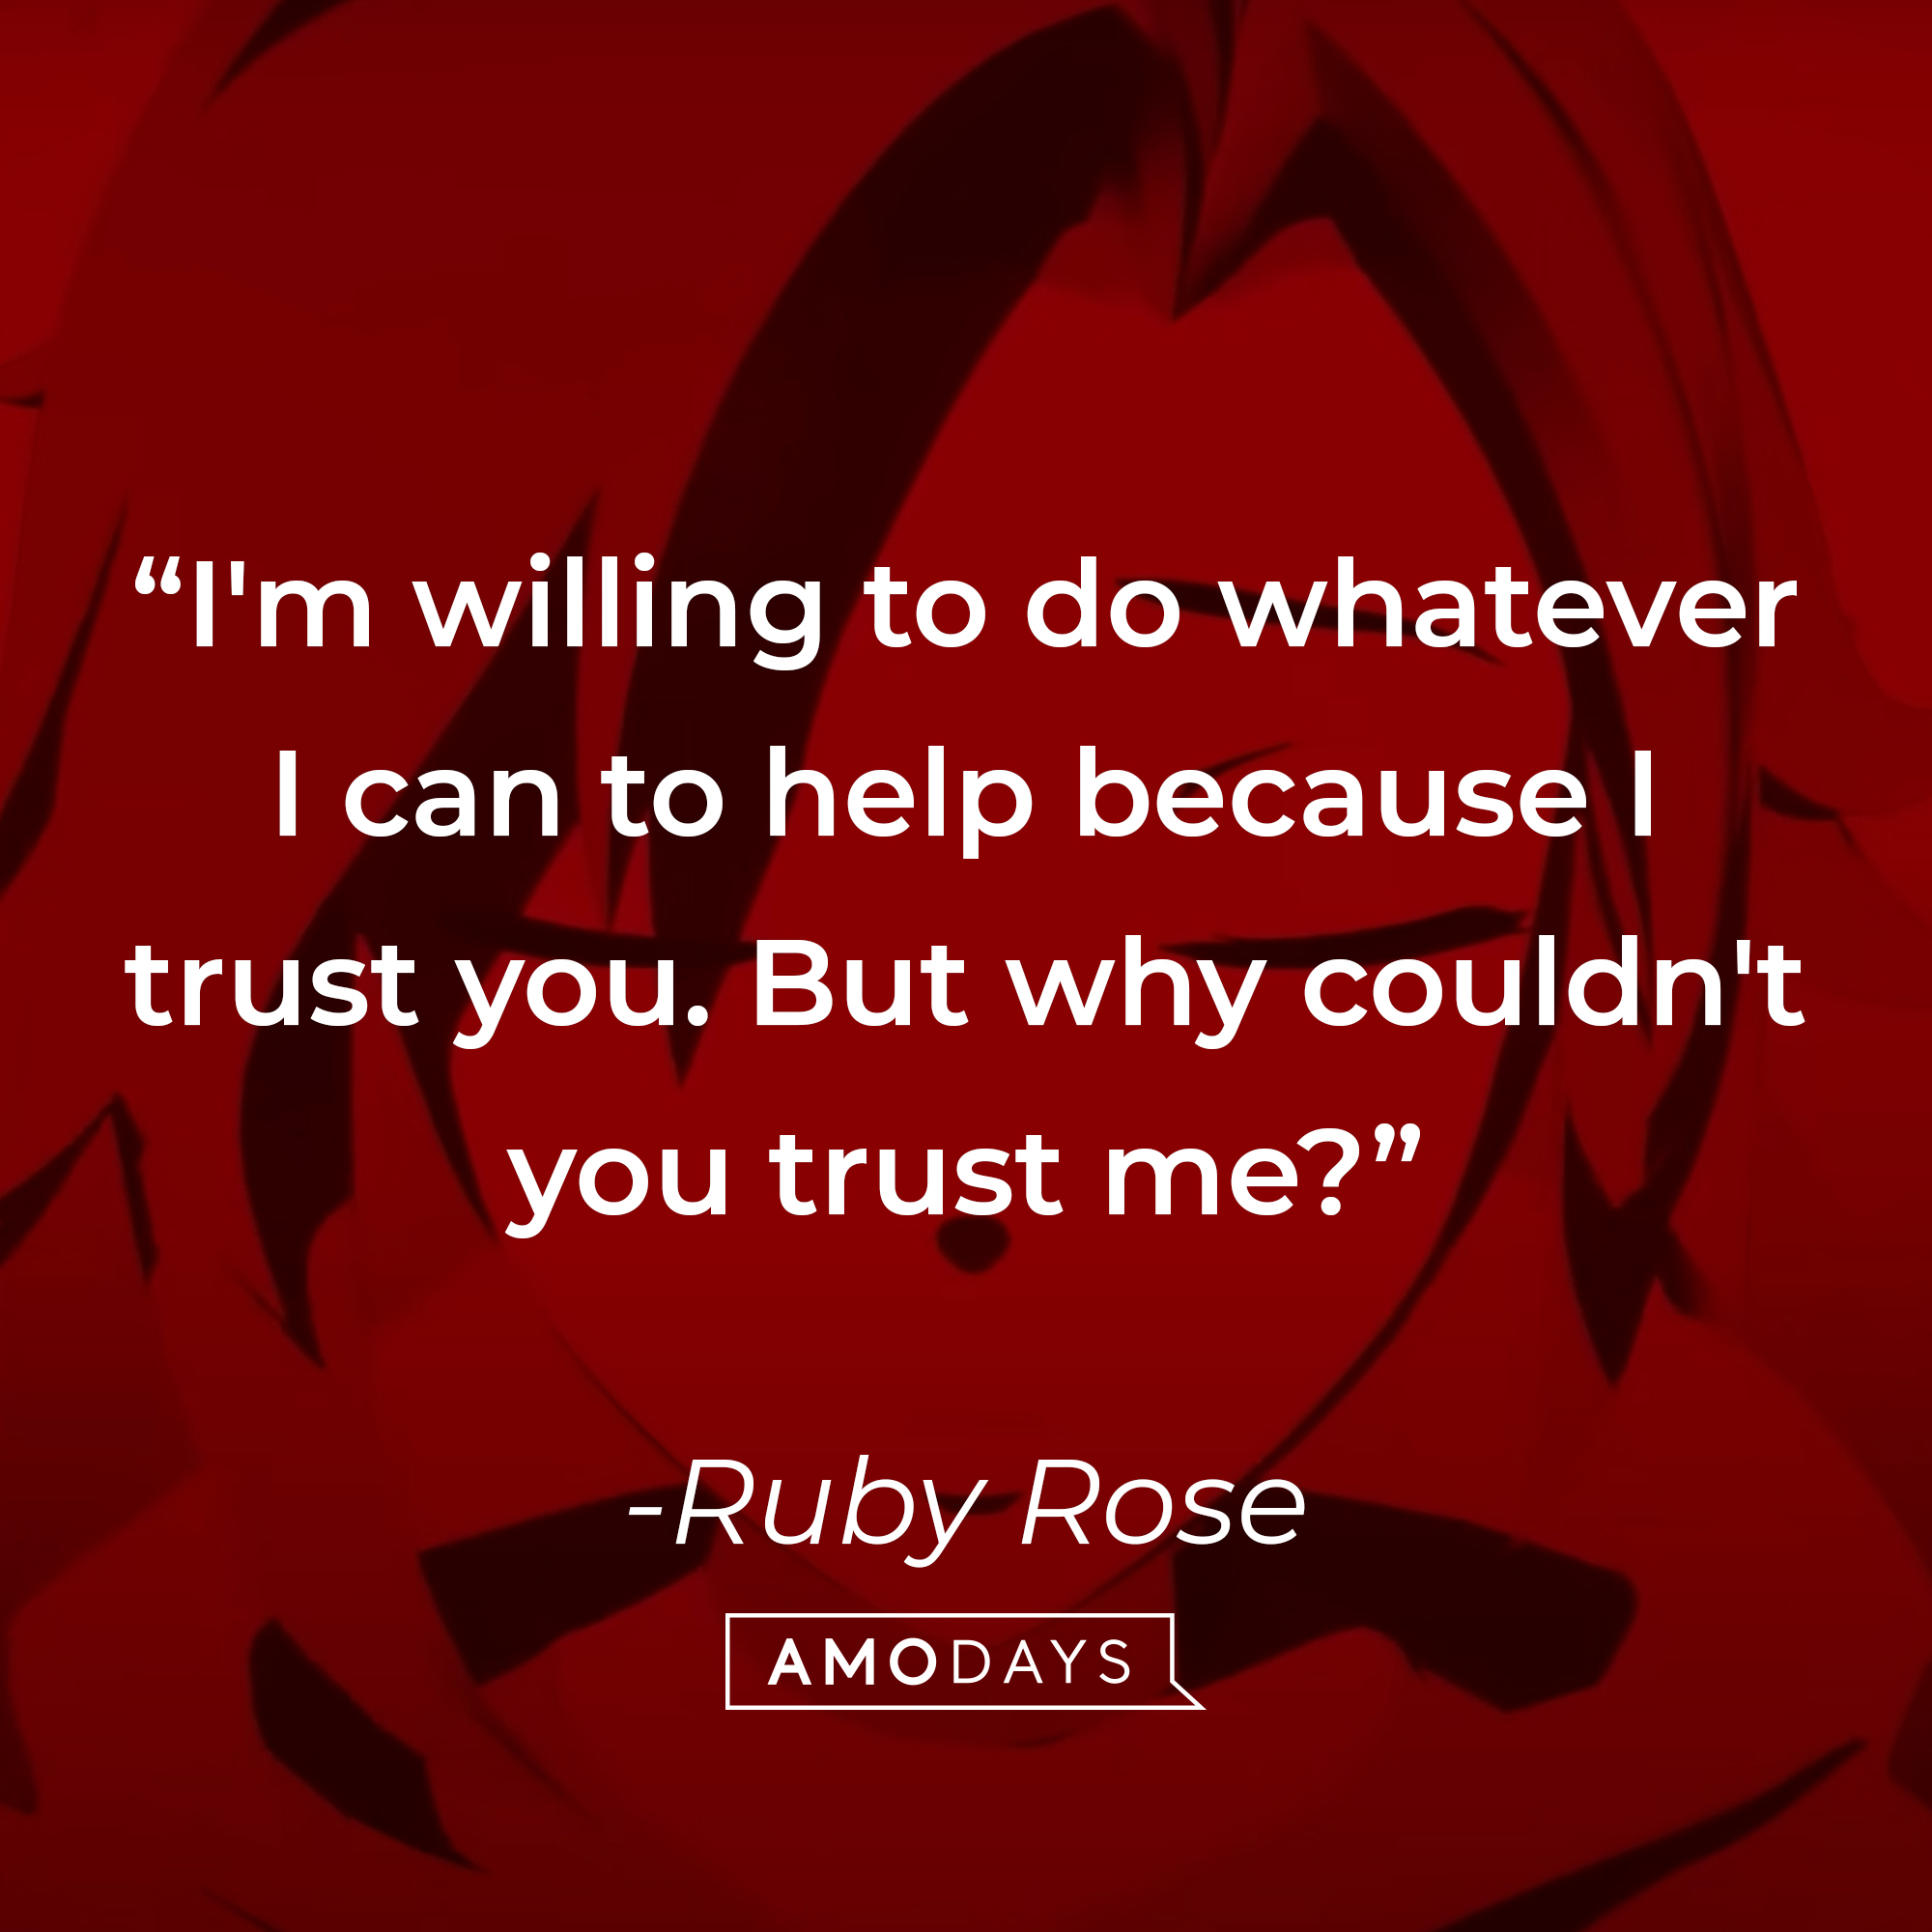 Ruby Rose's quote: "I'm willing to do whatever I can to help because I trust you. But why couldn't you trust me?" | Source: Youtube.com/crunchyrolldubs